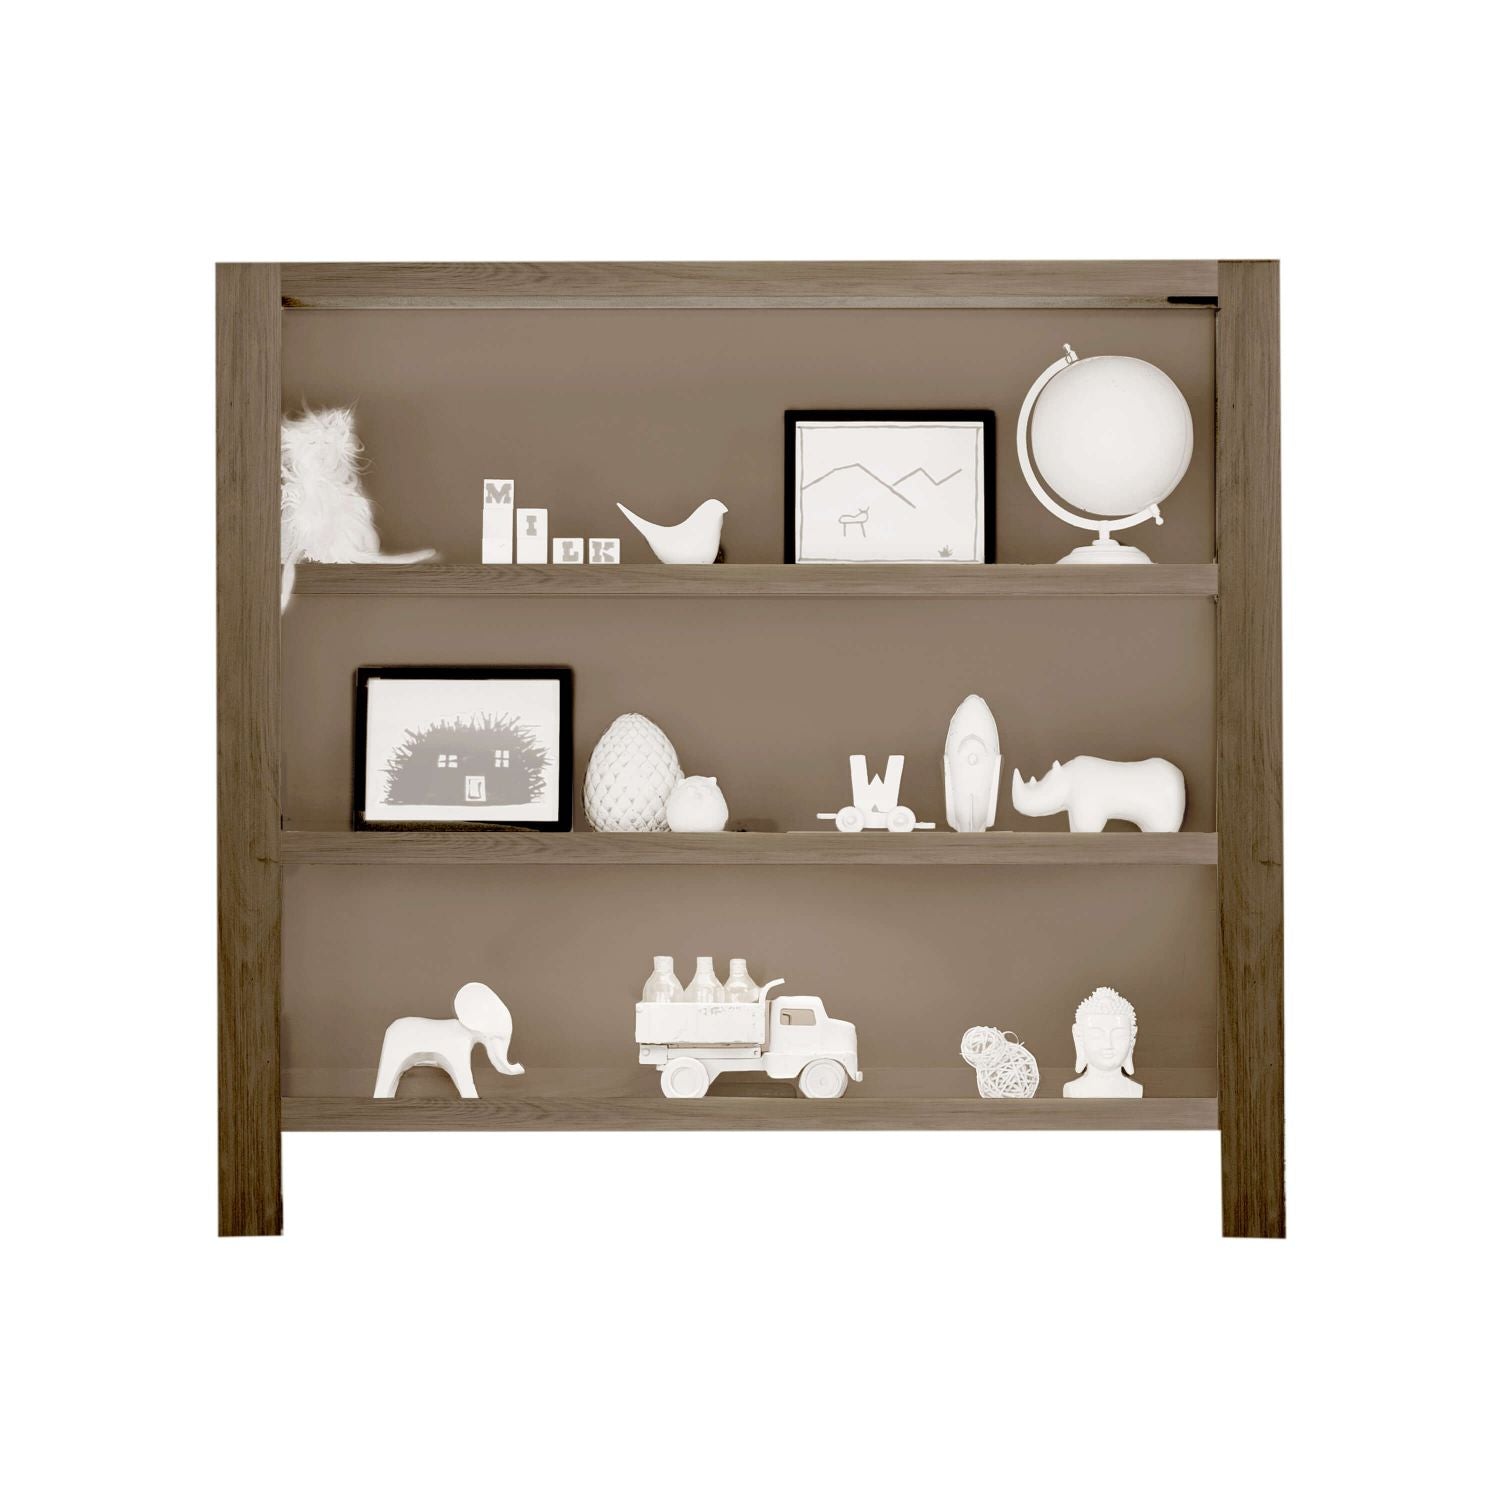 Shop the trend-setting rustic farmhouse bookcase hutch from the RELIC collection by Milk Street Baby.